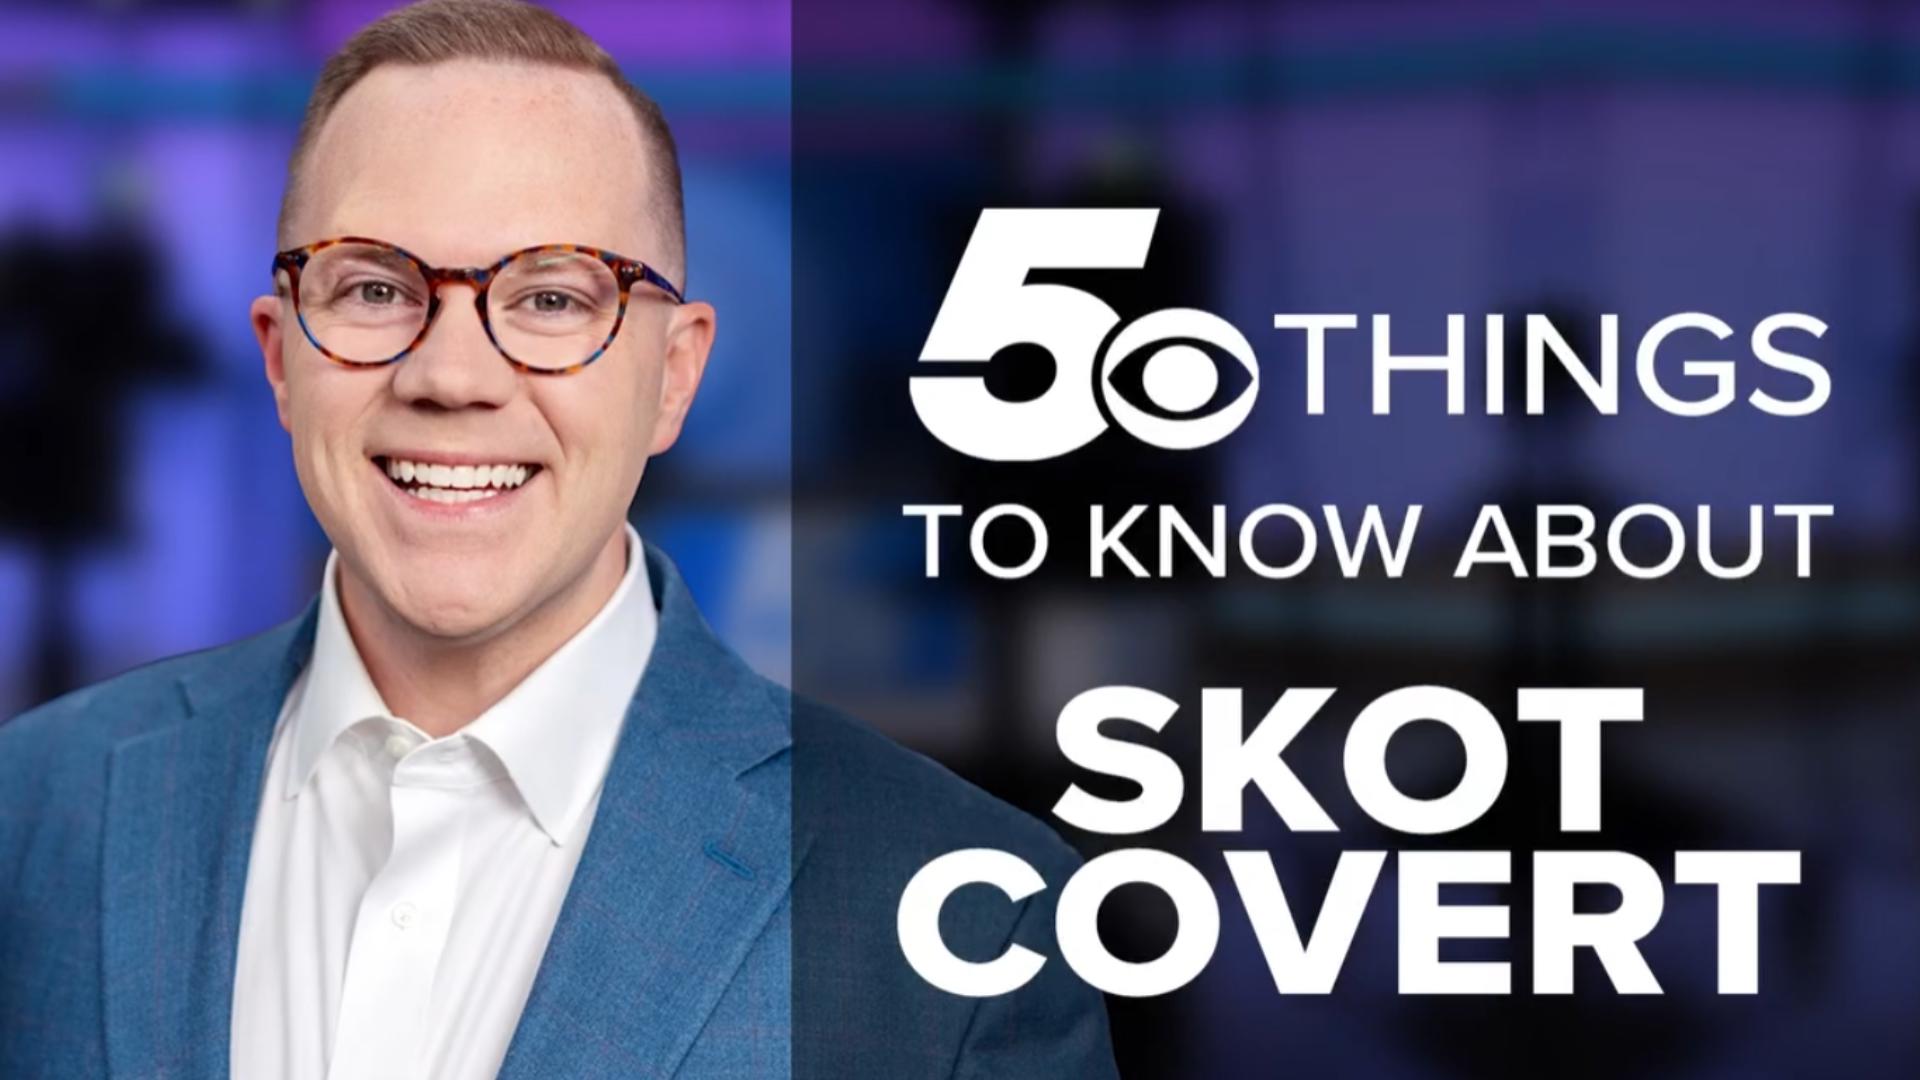 Meet our new 5NEWS Chief Meteorologist, Skot Covert! Here are 5 things he shares about himself.